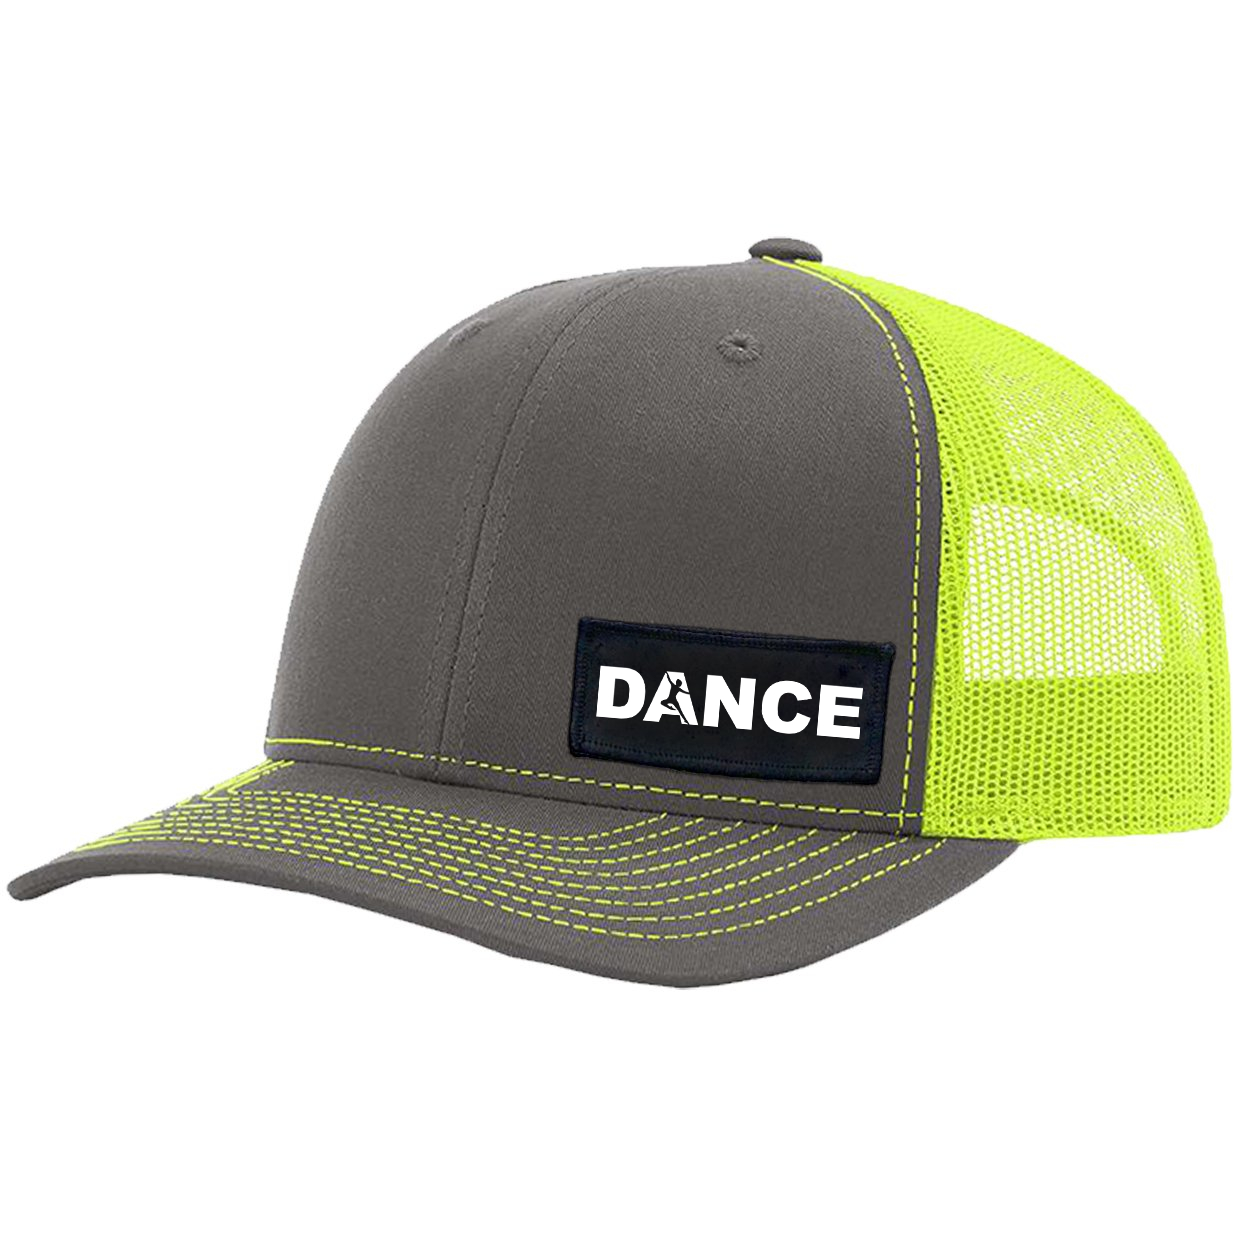 Dance Silhouette Logo Night Out Woven Patch Snapback Trucker Hat Gray/Neon Yellow (White Logo)